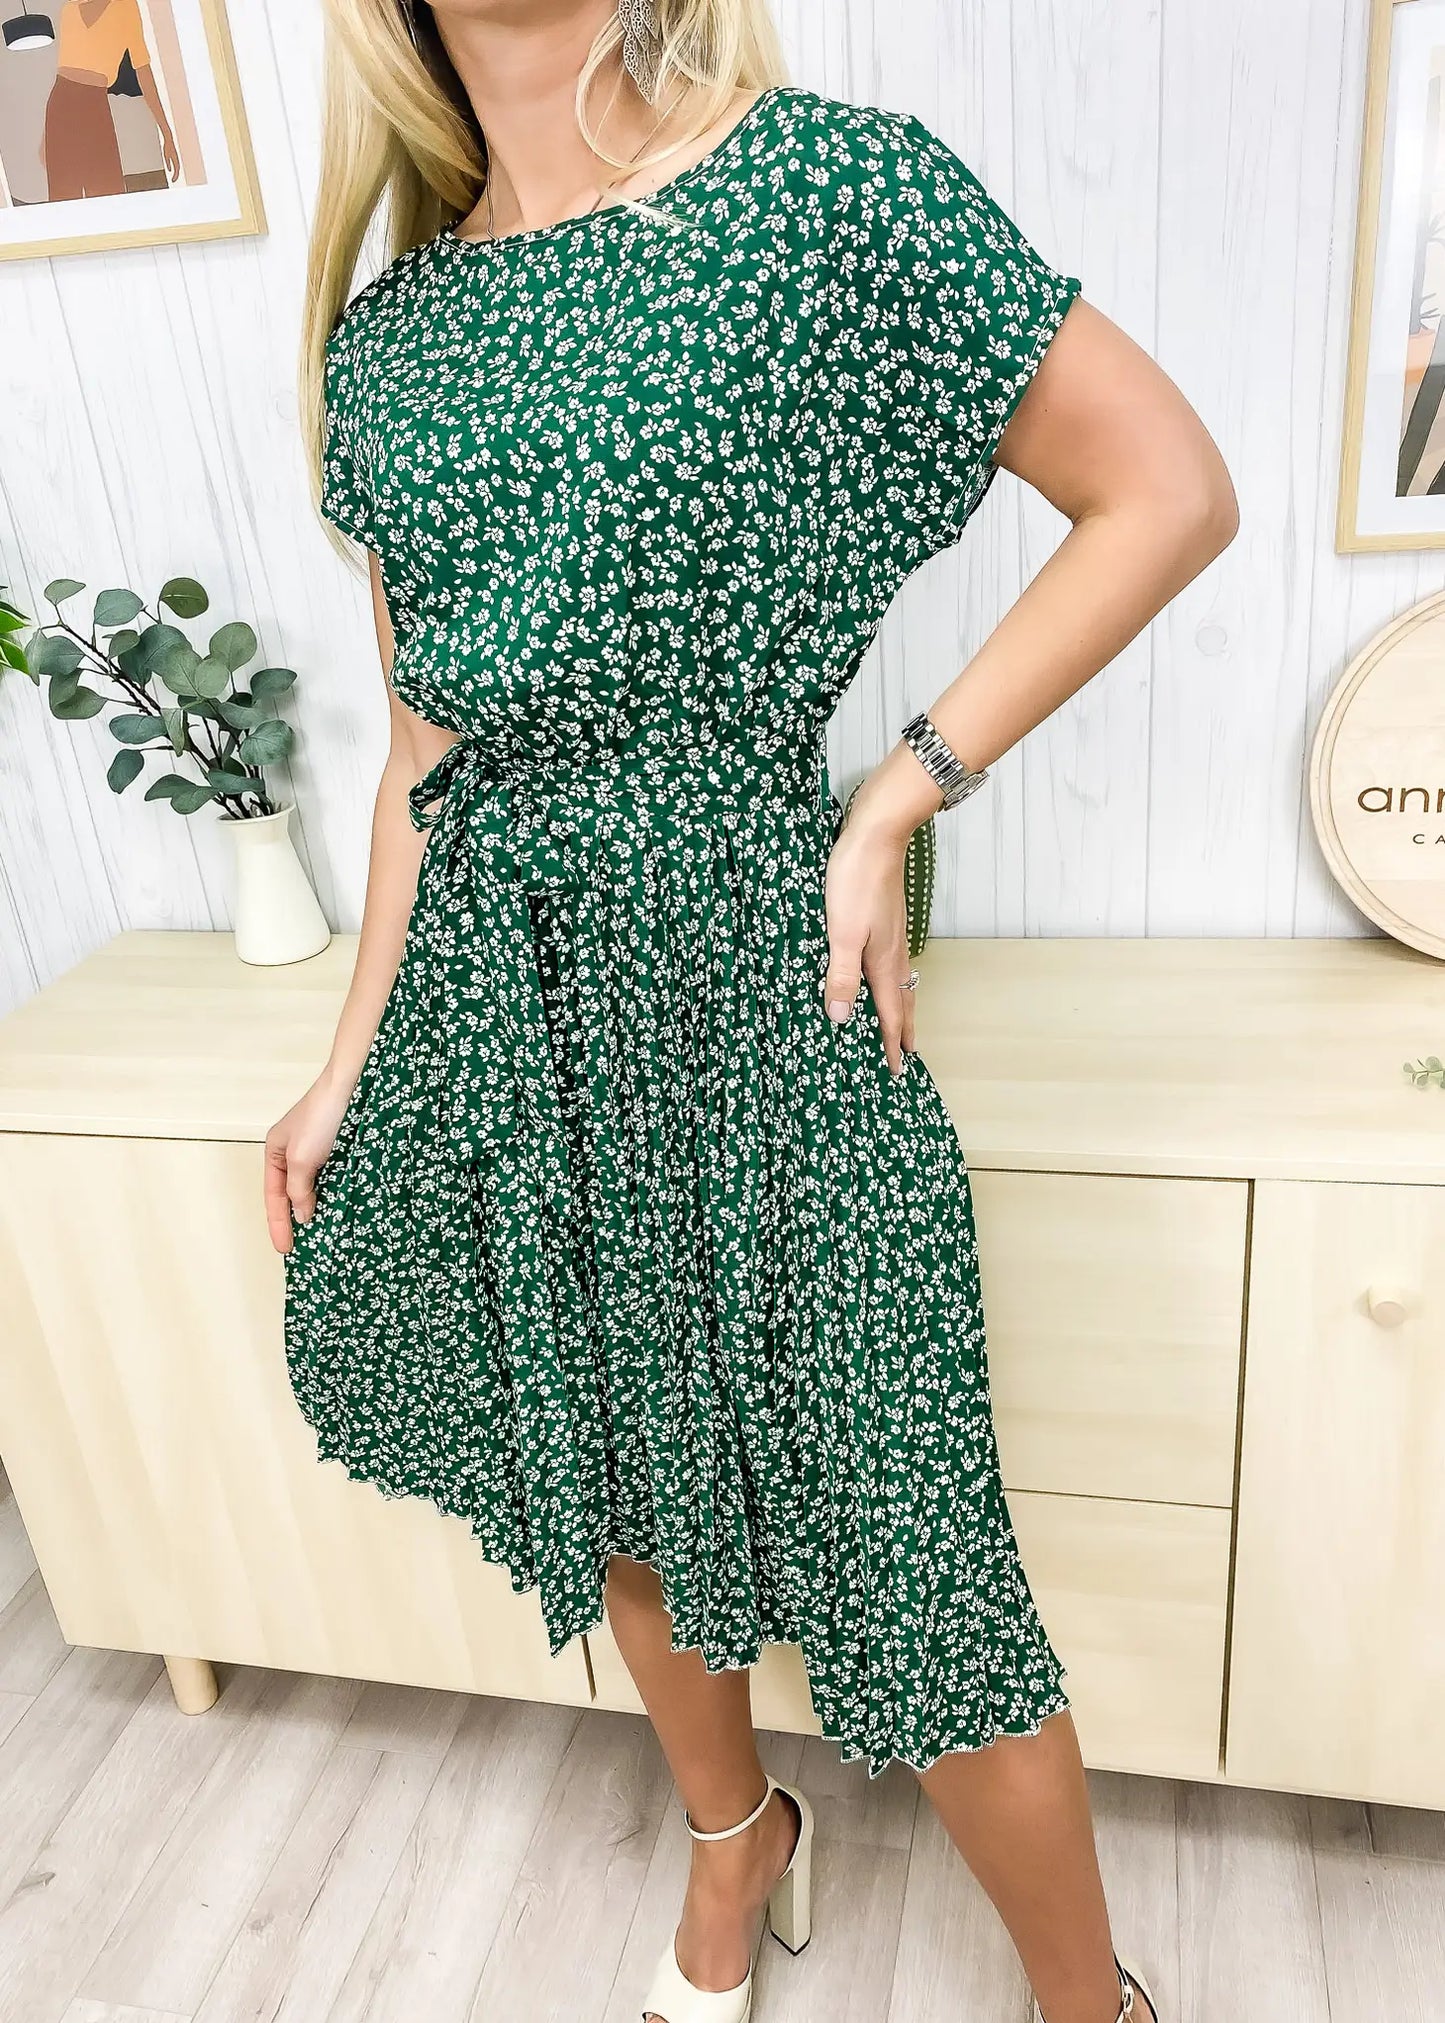 A model wearing a green dress featuring a round neck line, short sleeves, tie-waist detail, pleated skirt, and below knee length. Pair it with a necklace and boots for an elegant wine tasting in San Luis Obispo look.